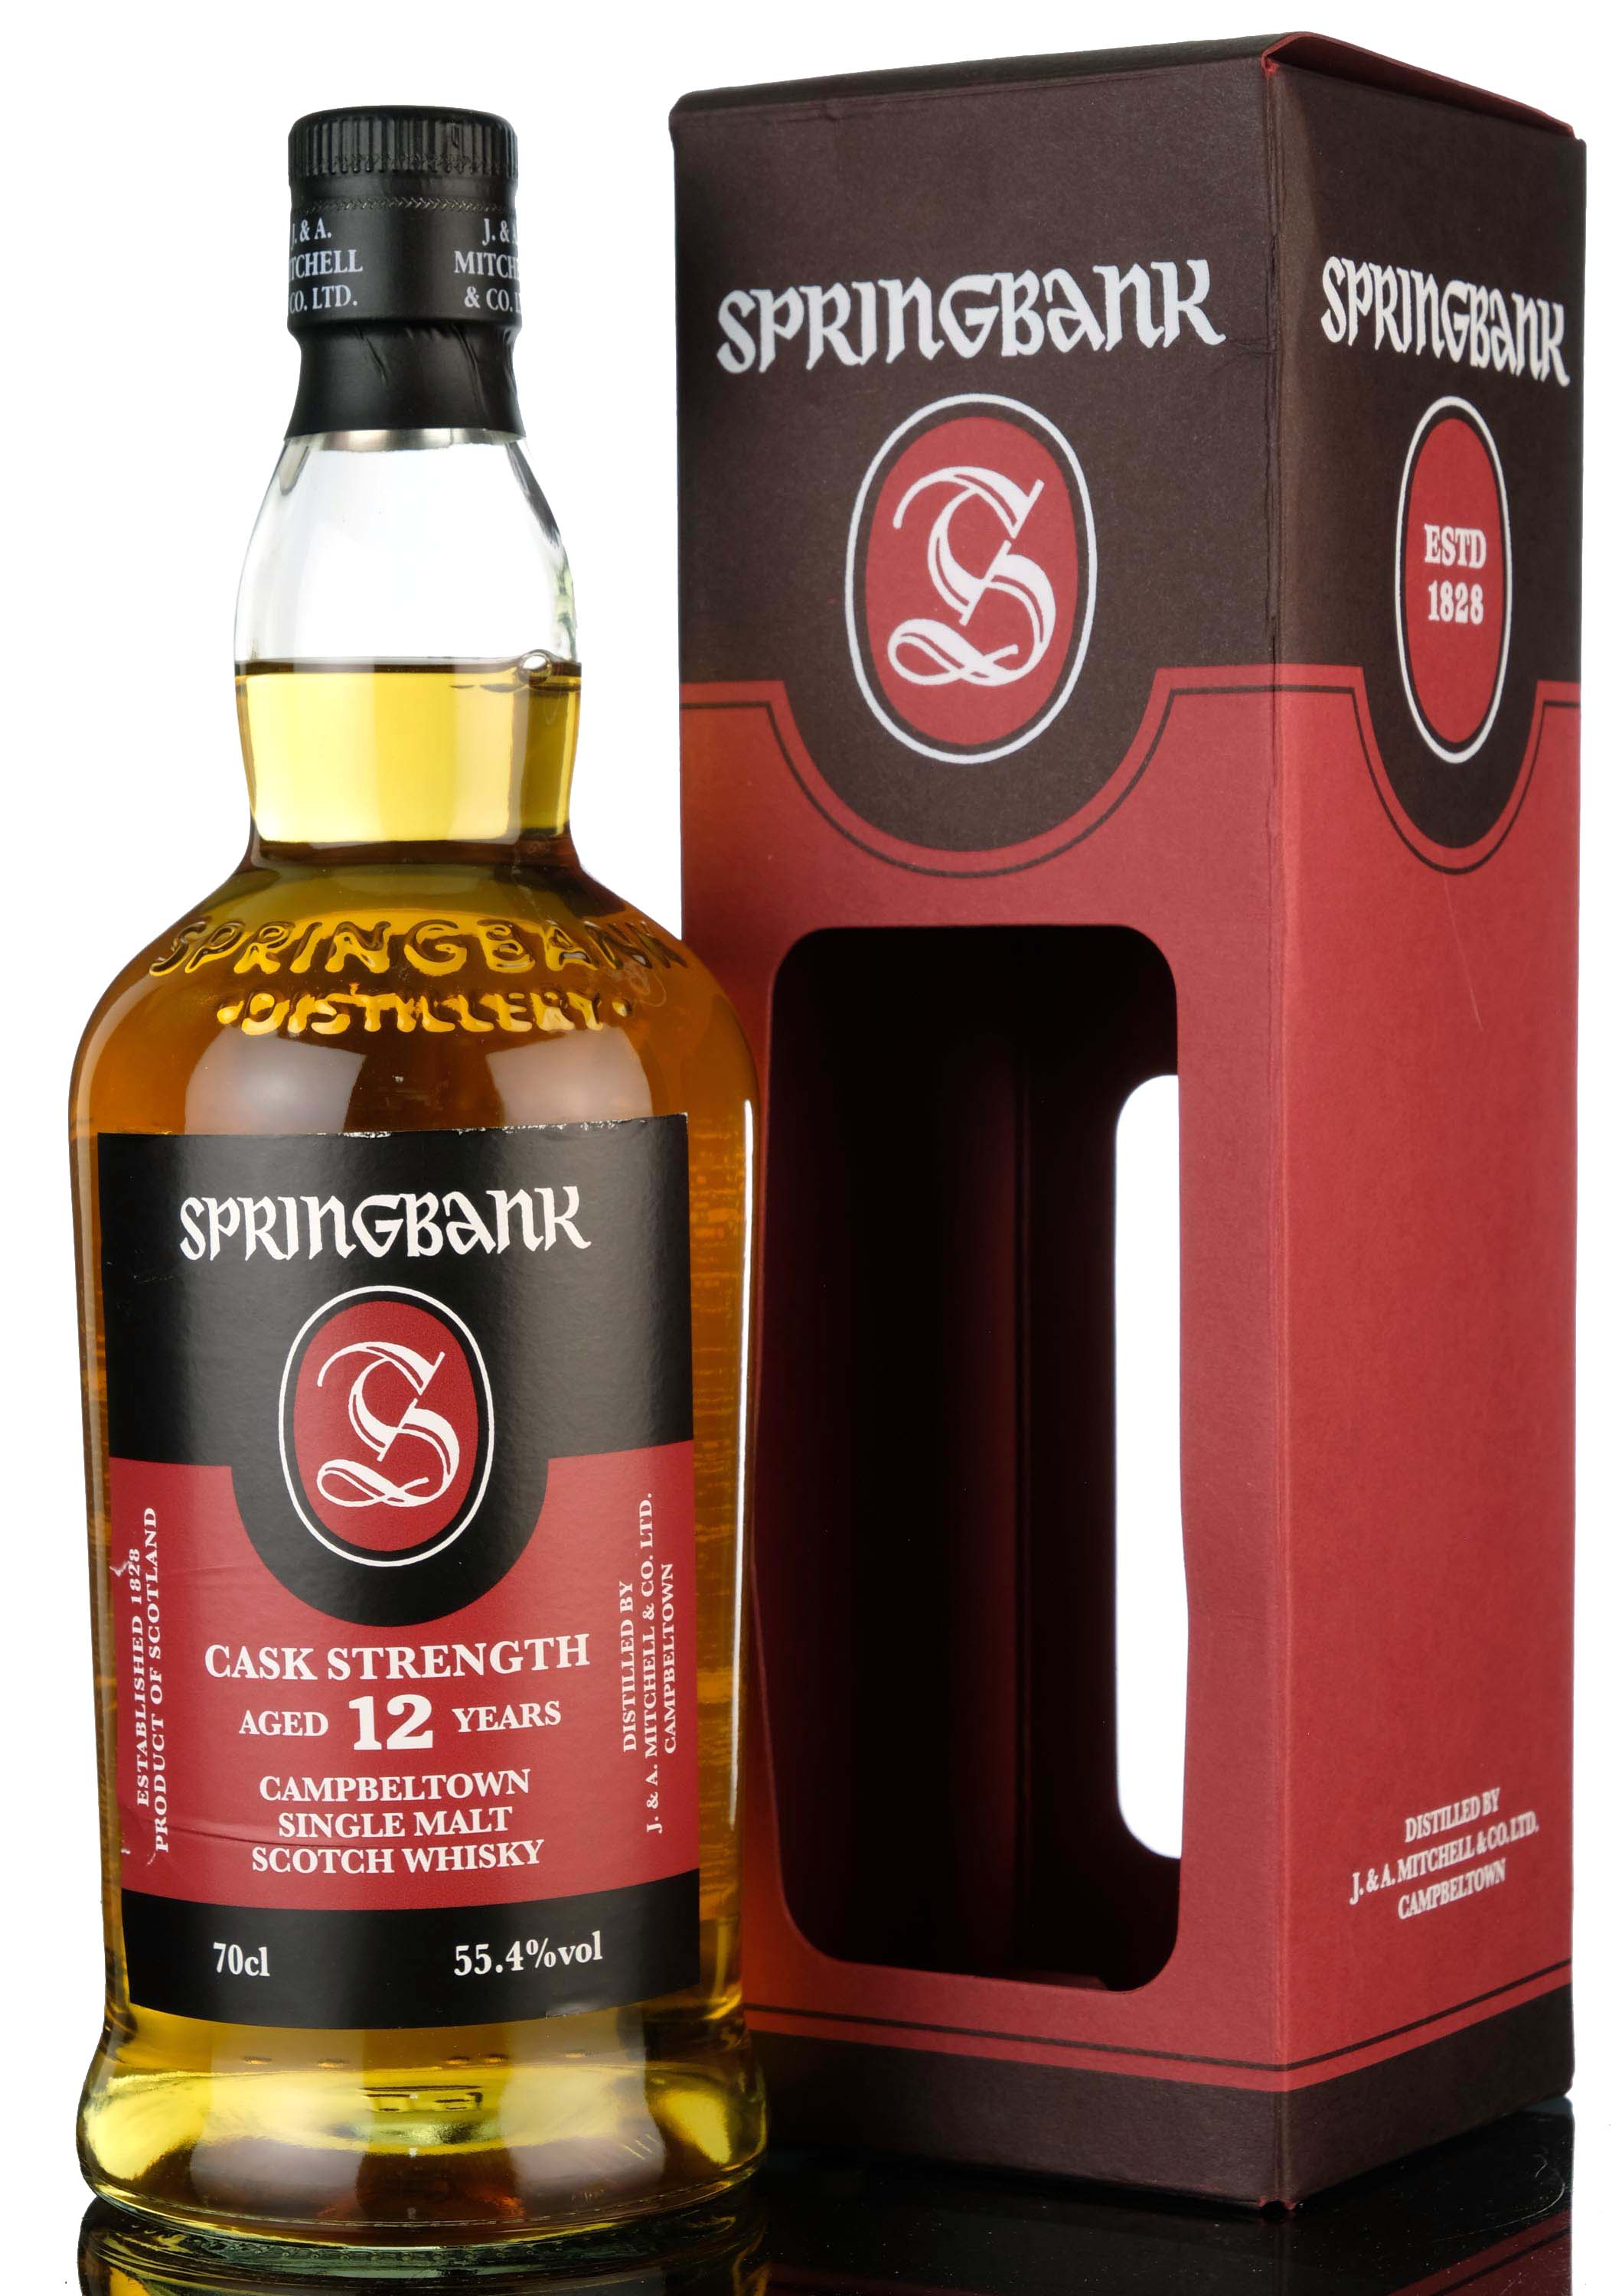 Springbank 12 Year Old - Cask Strength 56.3% - 2016 Release